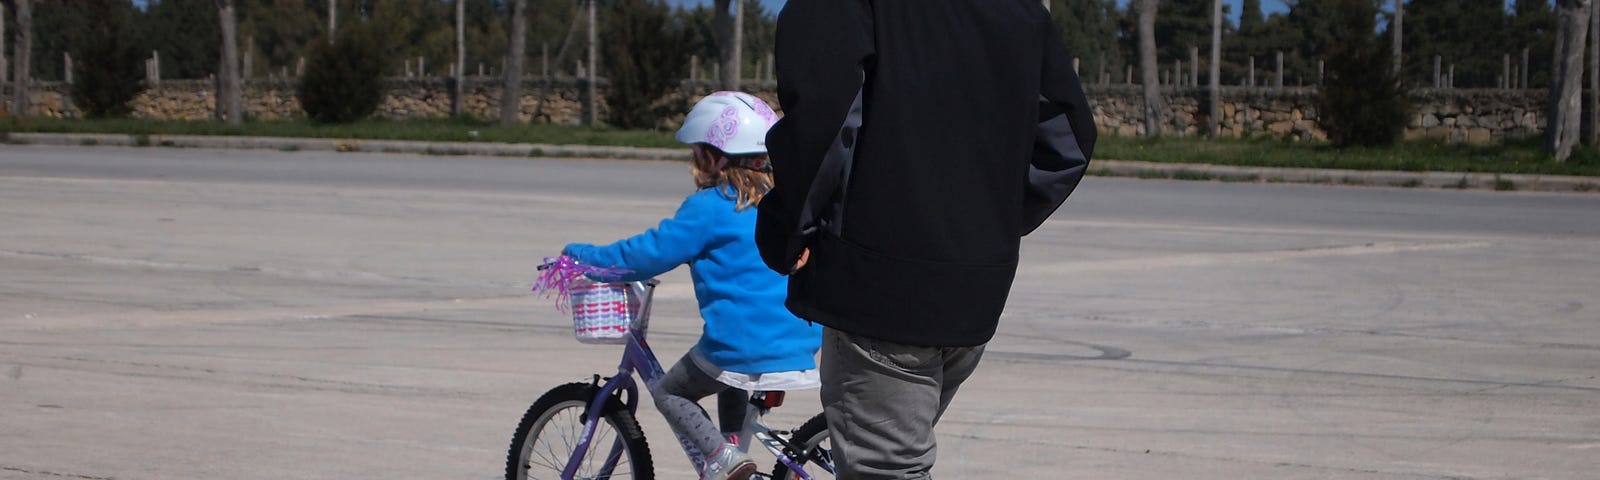 a kid on a bike and an adult running behind her. Photo by the author. All copyrights reserved